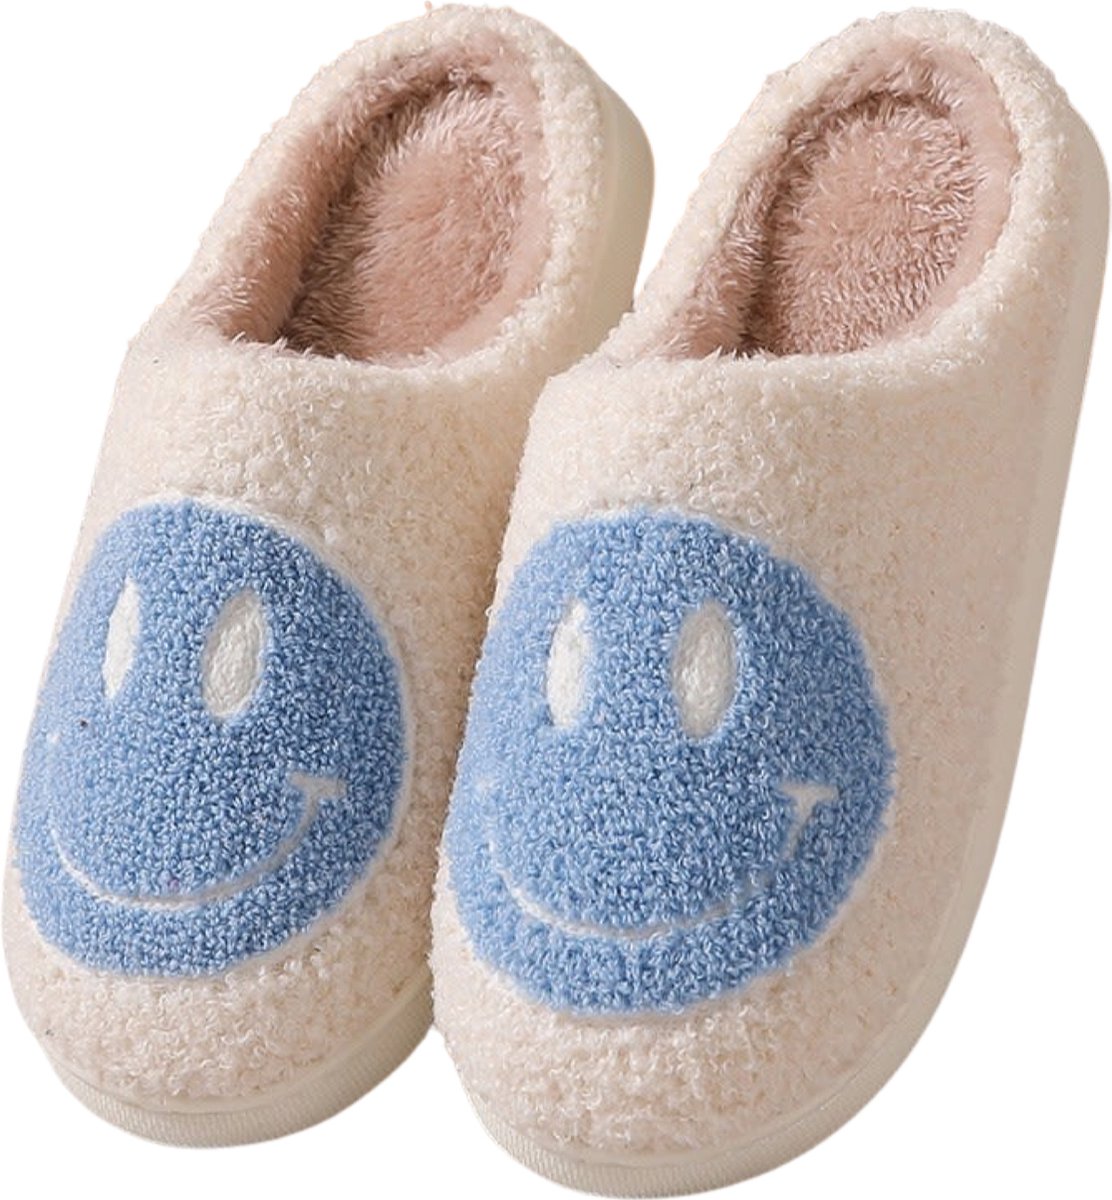 HAPPY SLIPPERS BLUE 38-39